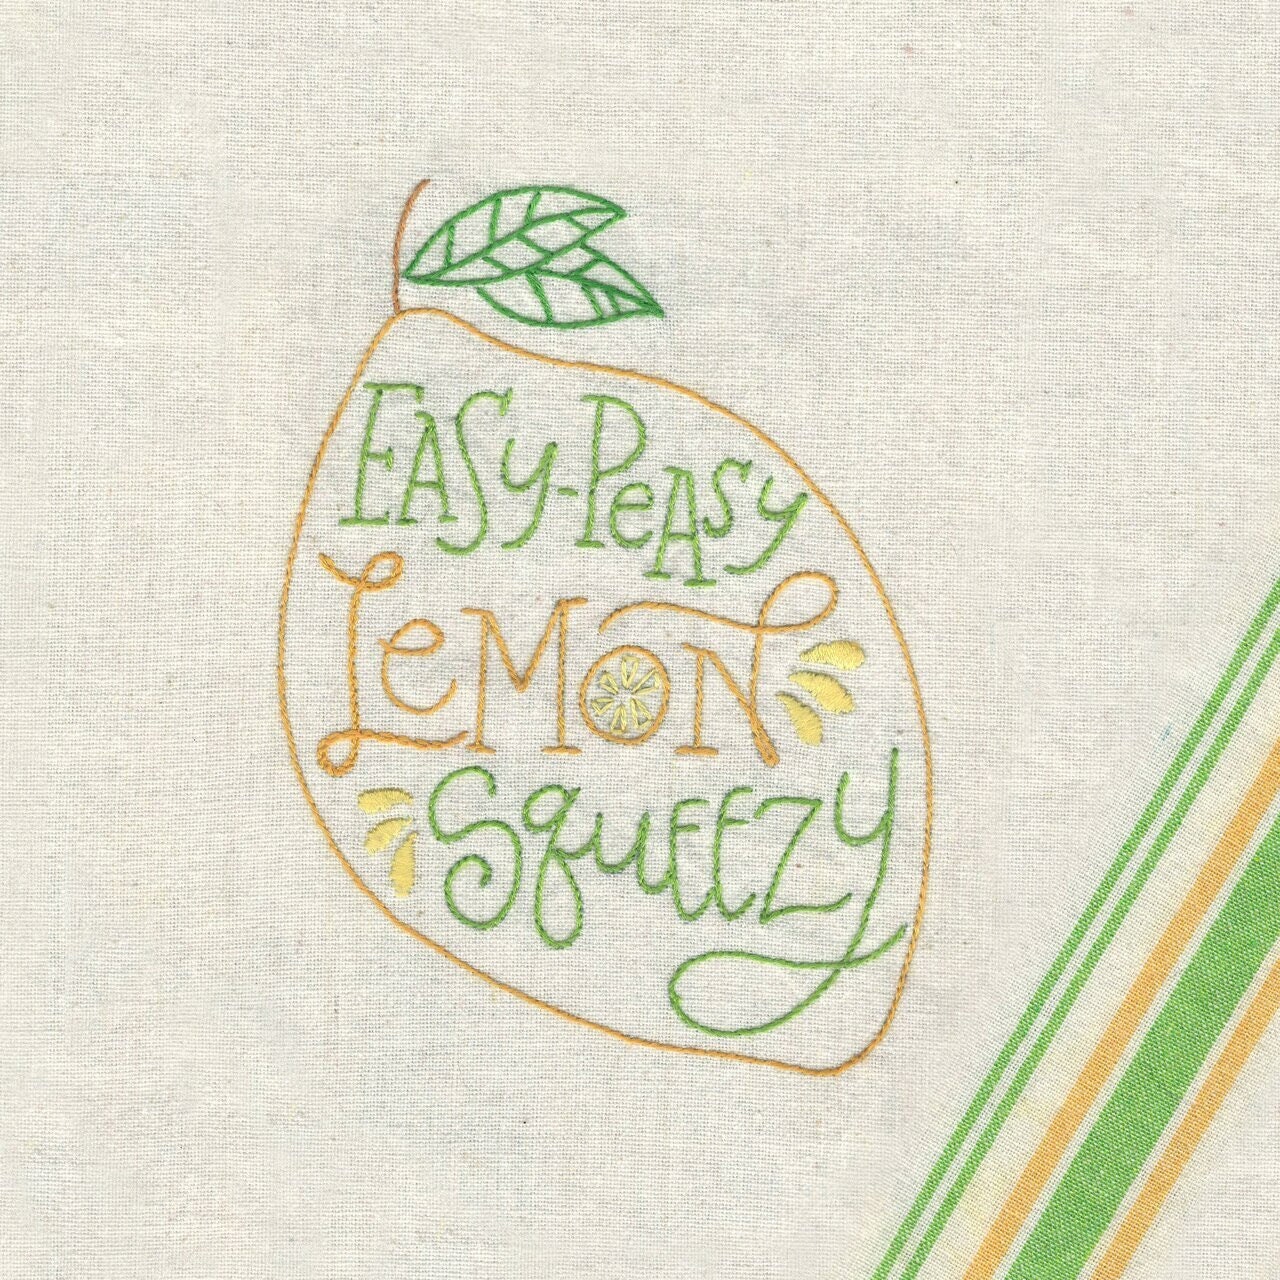 Embroidery Transfer Pattern Aunt Martha's® #4040 When Life Gives You Lemons